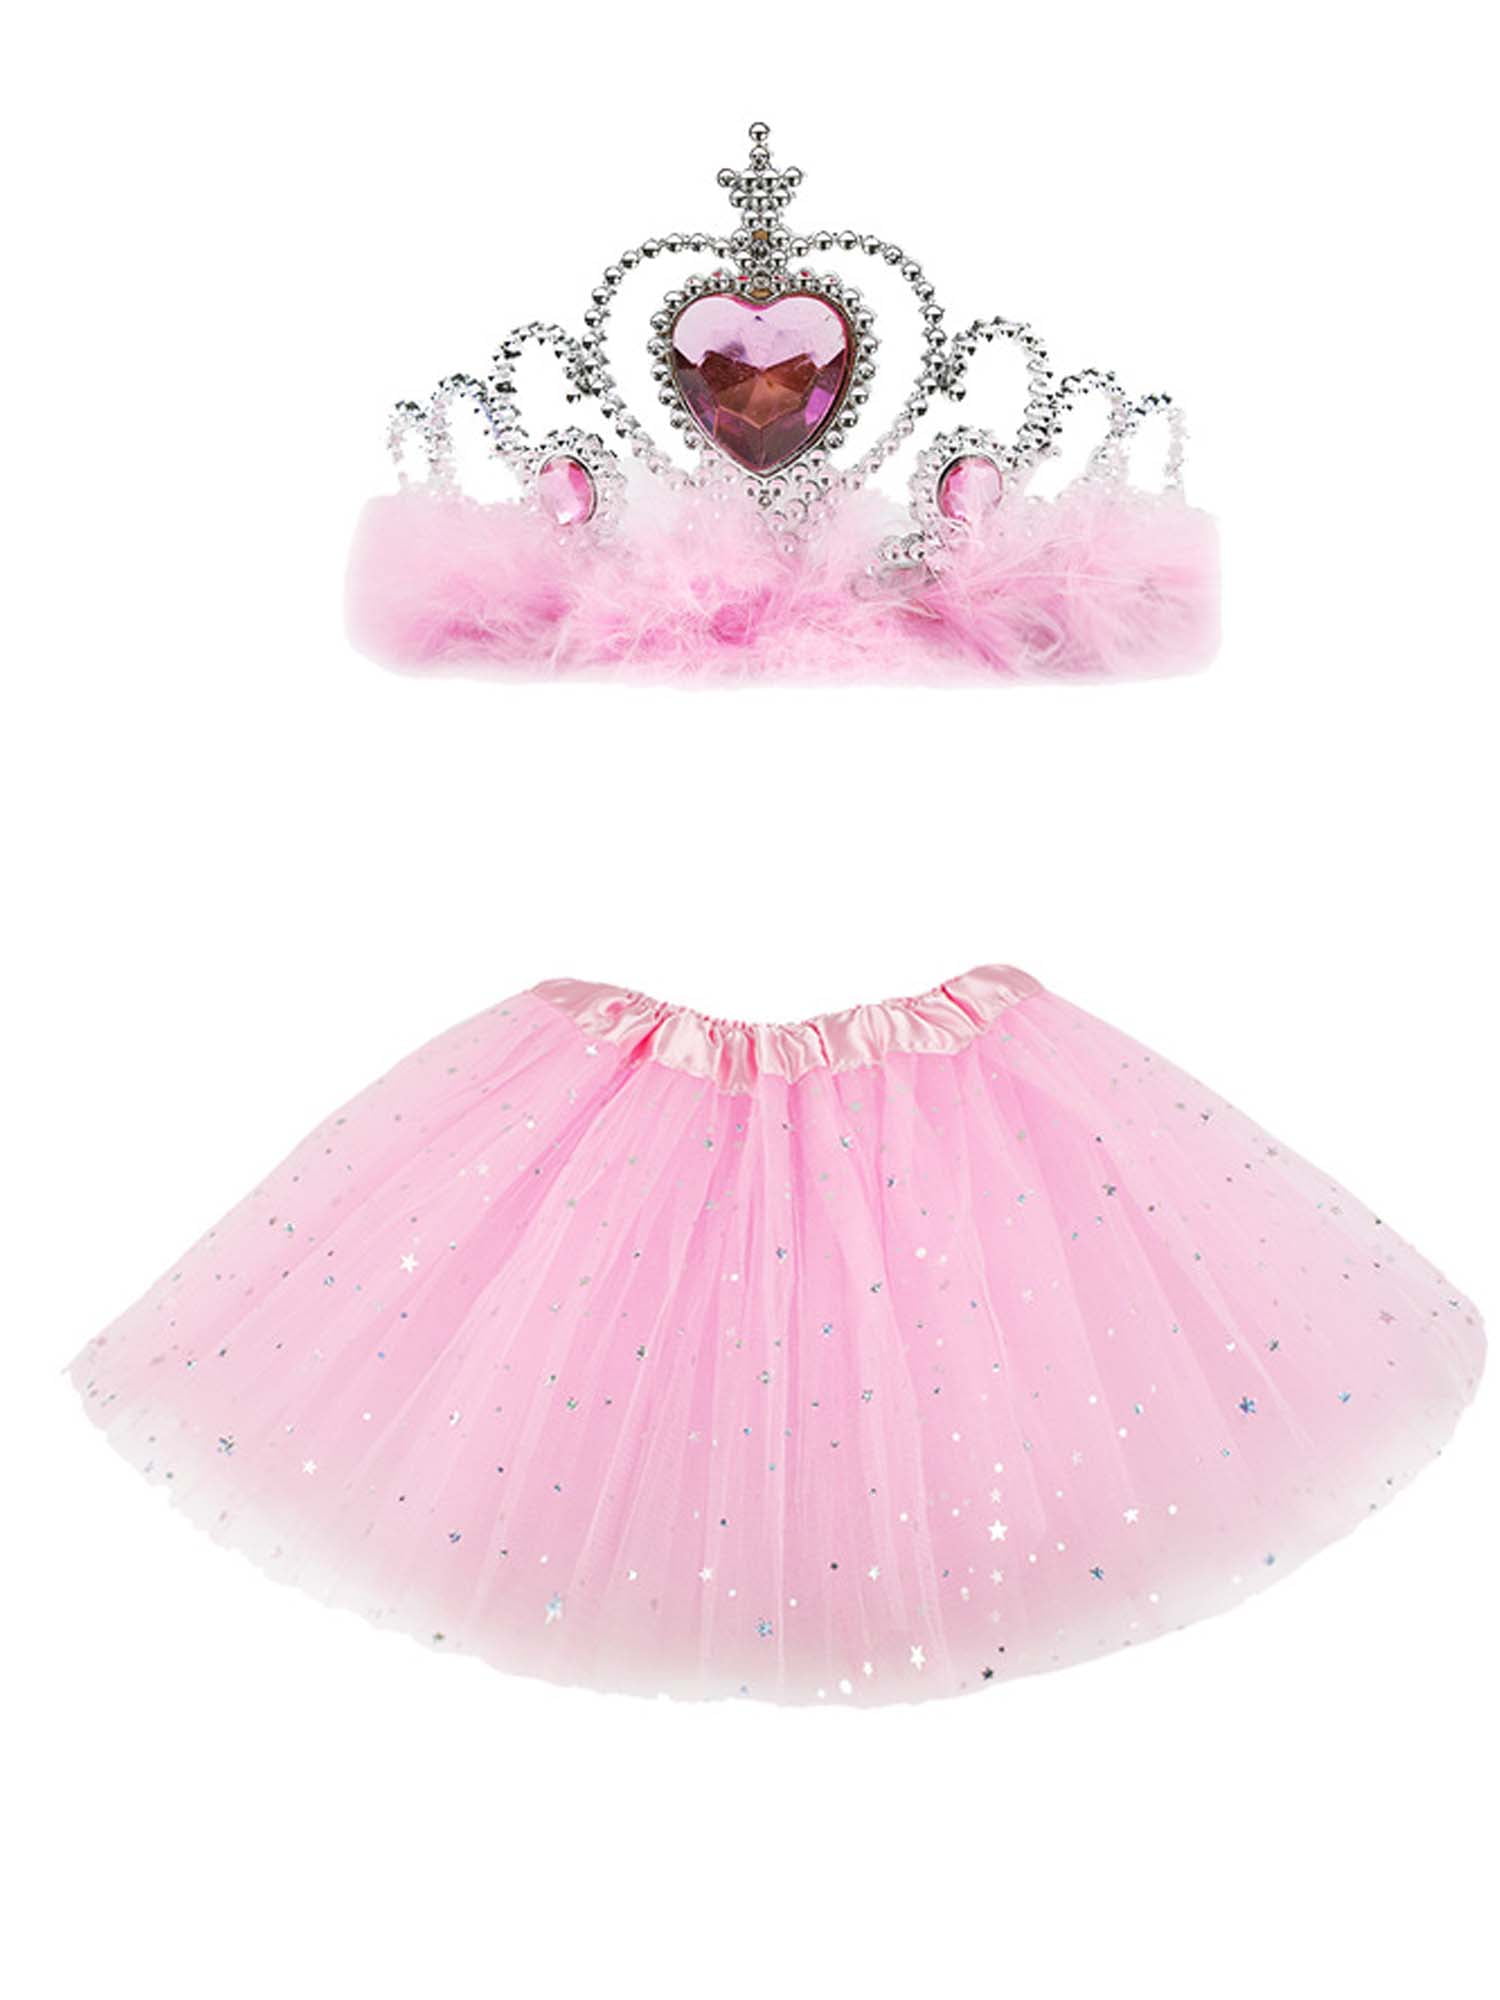 G.C Girls Princess Dress up Clothes with Star Sequins and Princess Crown Tiara Set Ballet Birthday Party for 2-8 Year Old Girl Gifts Tutu Skirt as Party Favors 